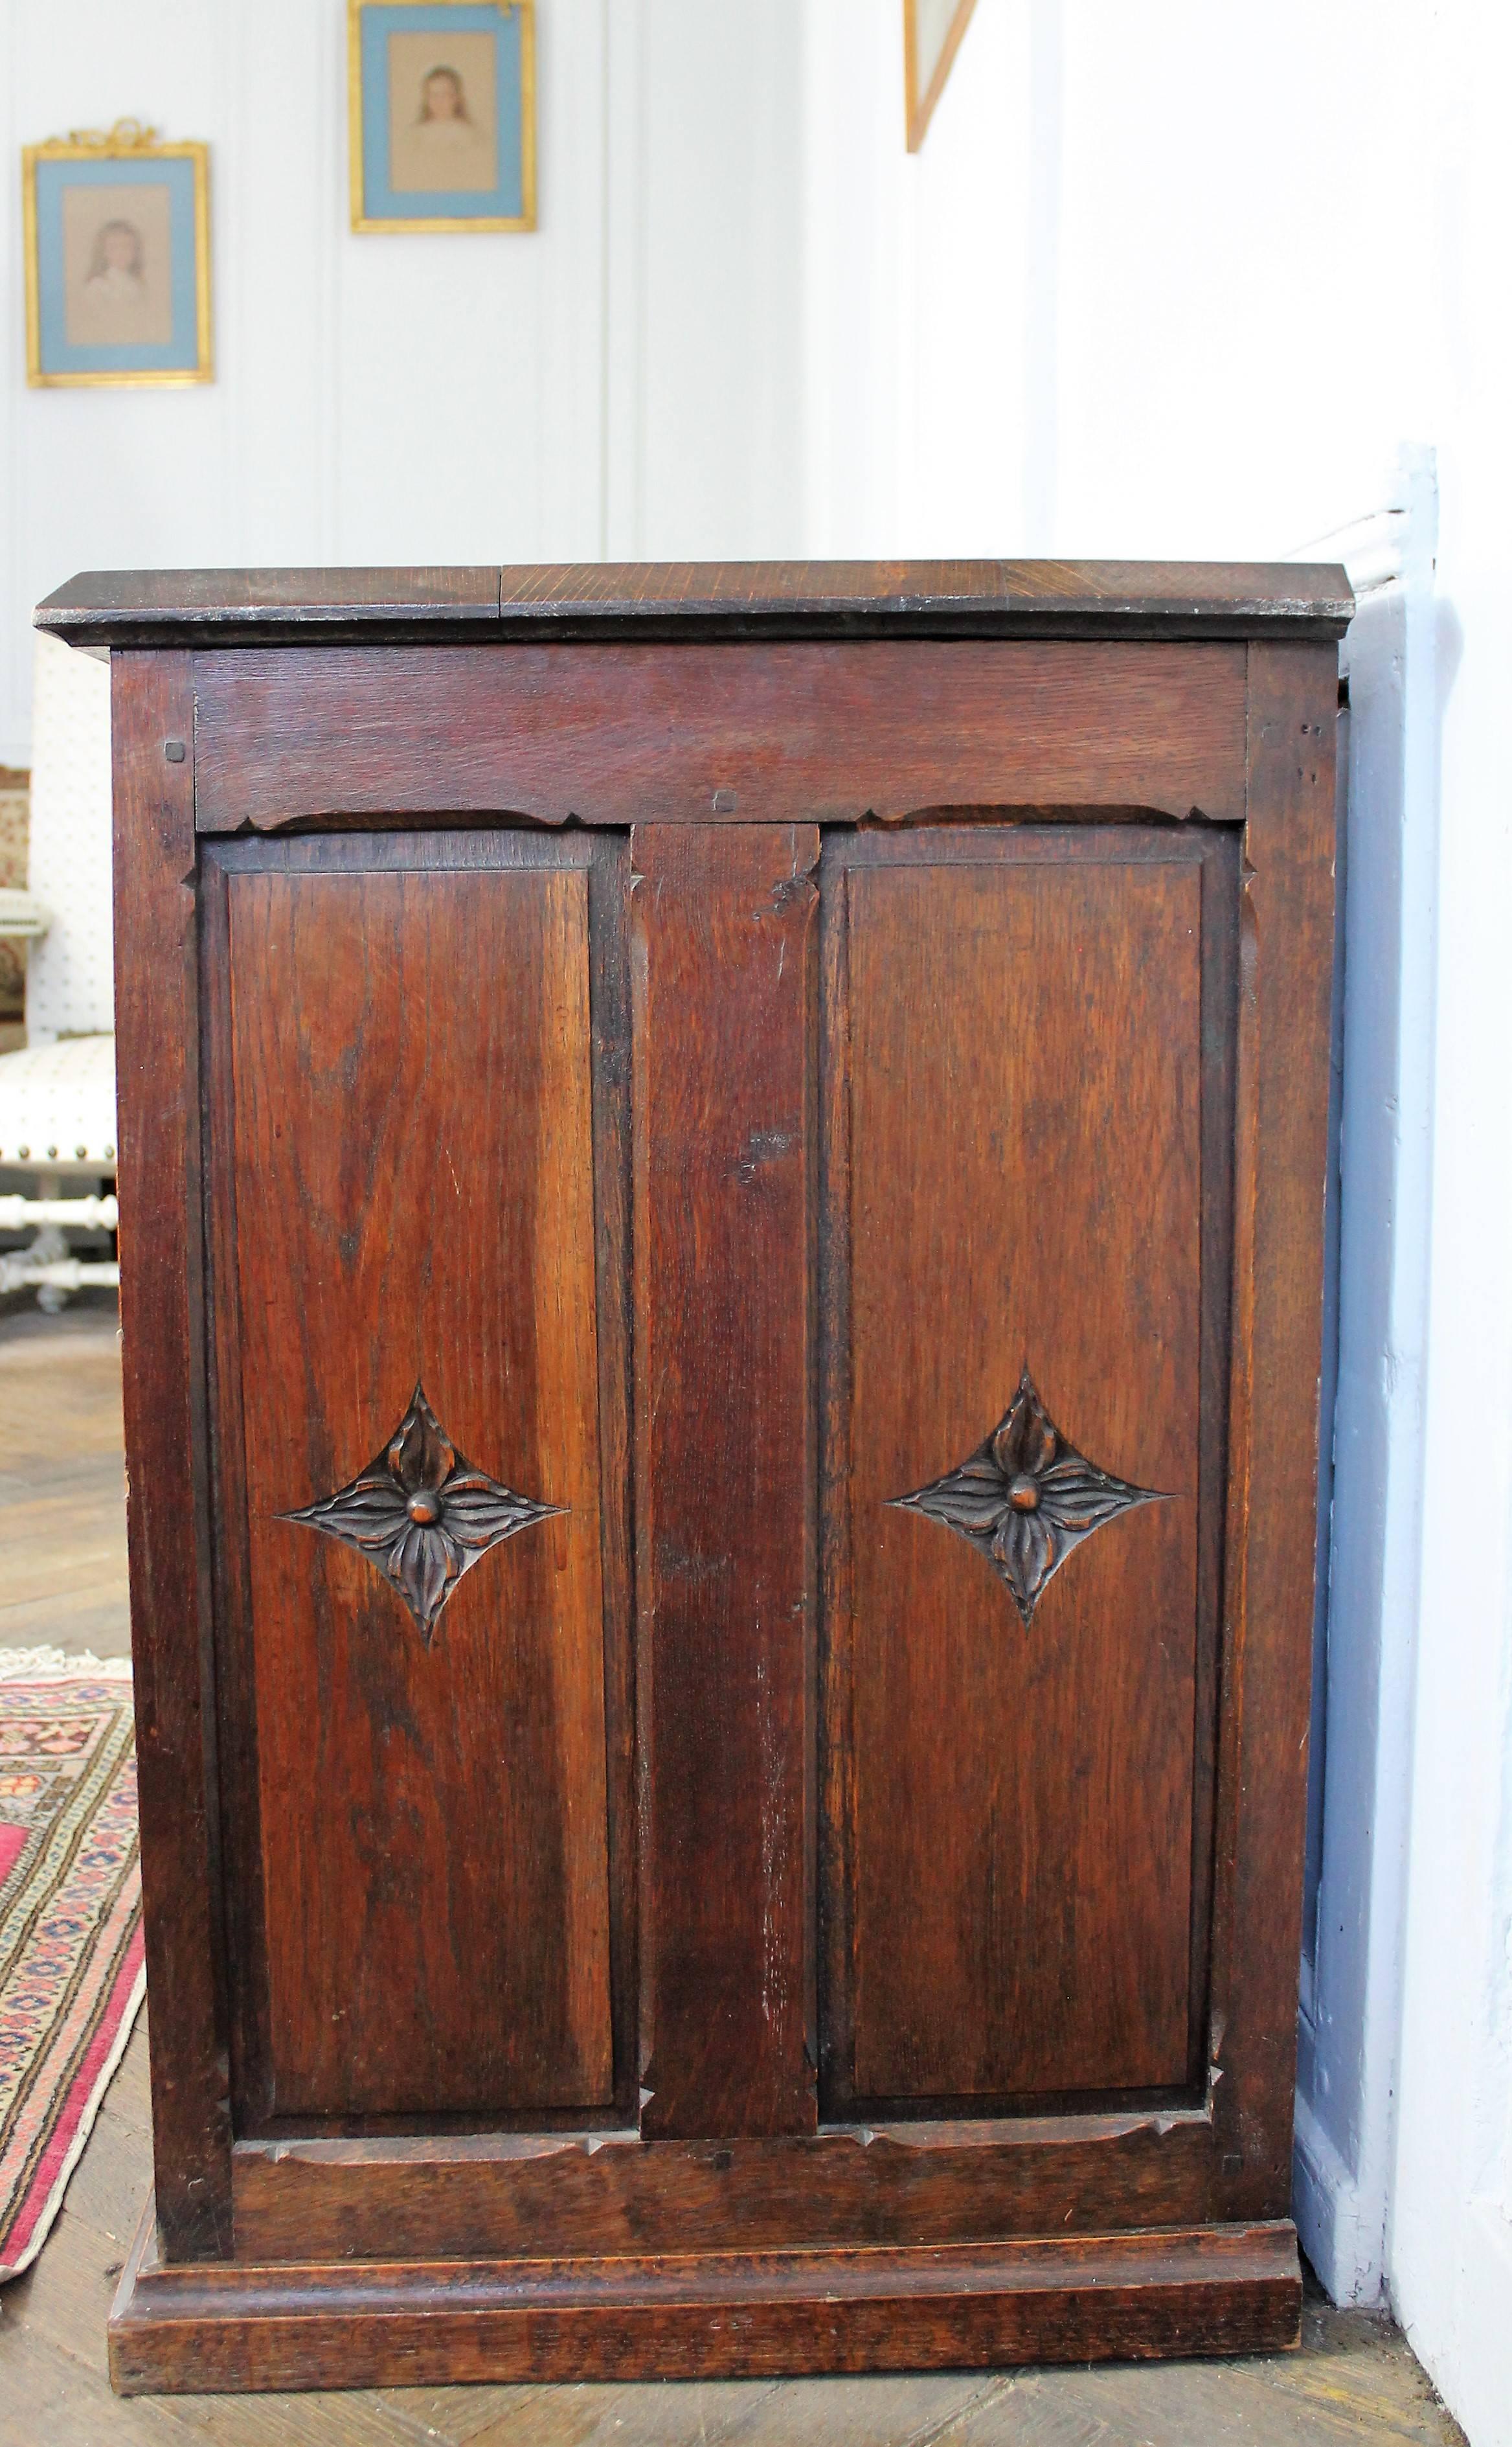 Hand-Carved Gothic Revival Armoire with an Oak Door